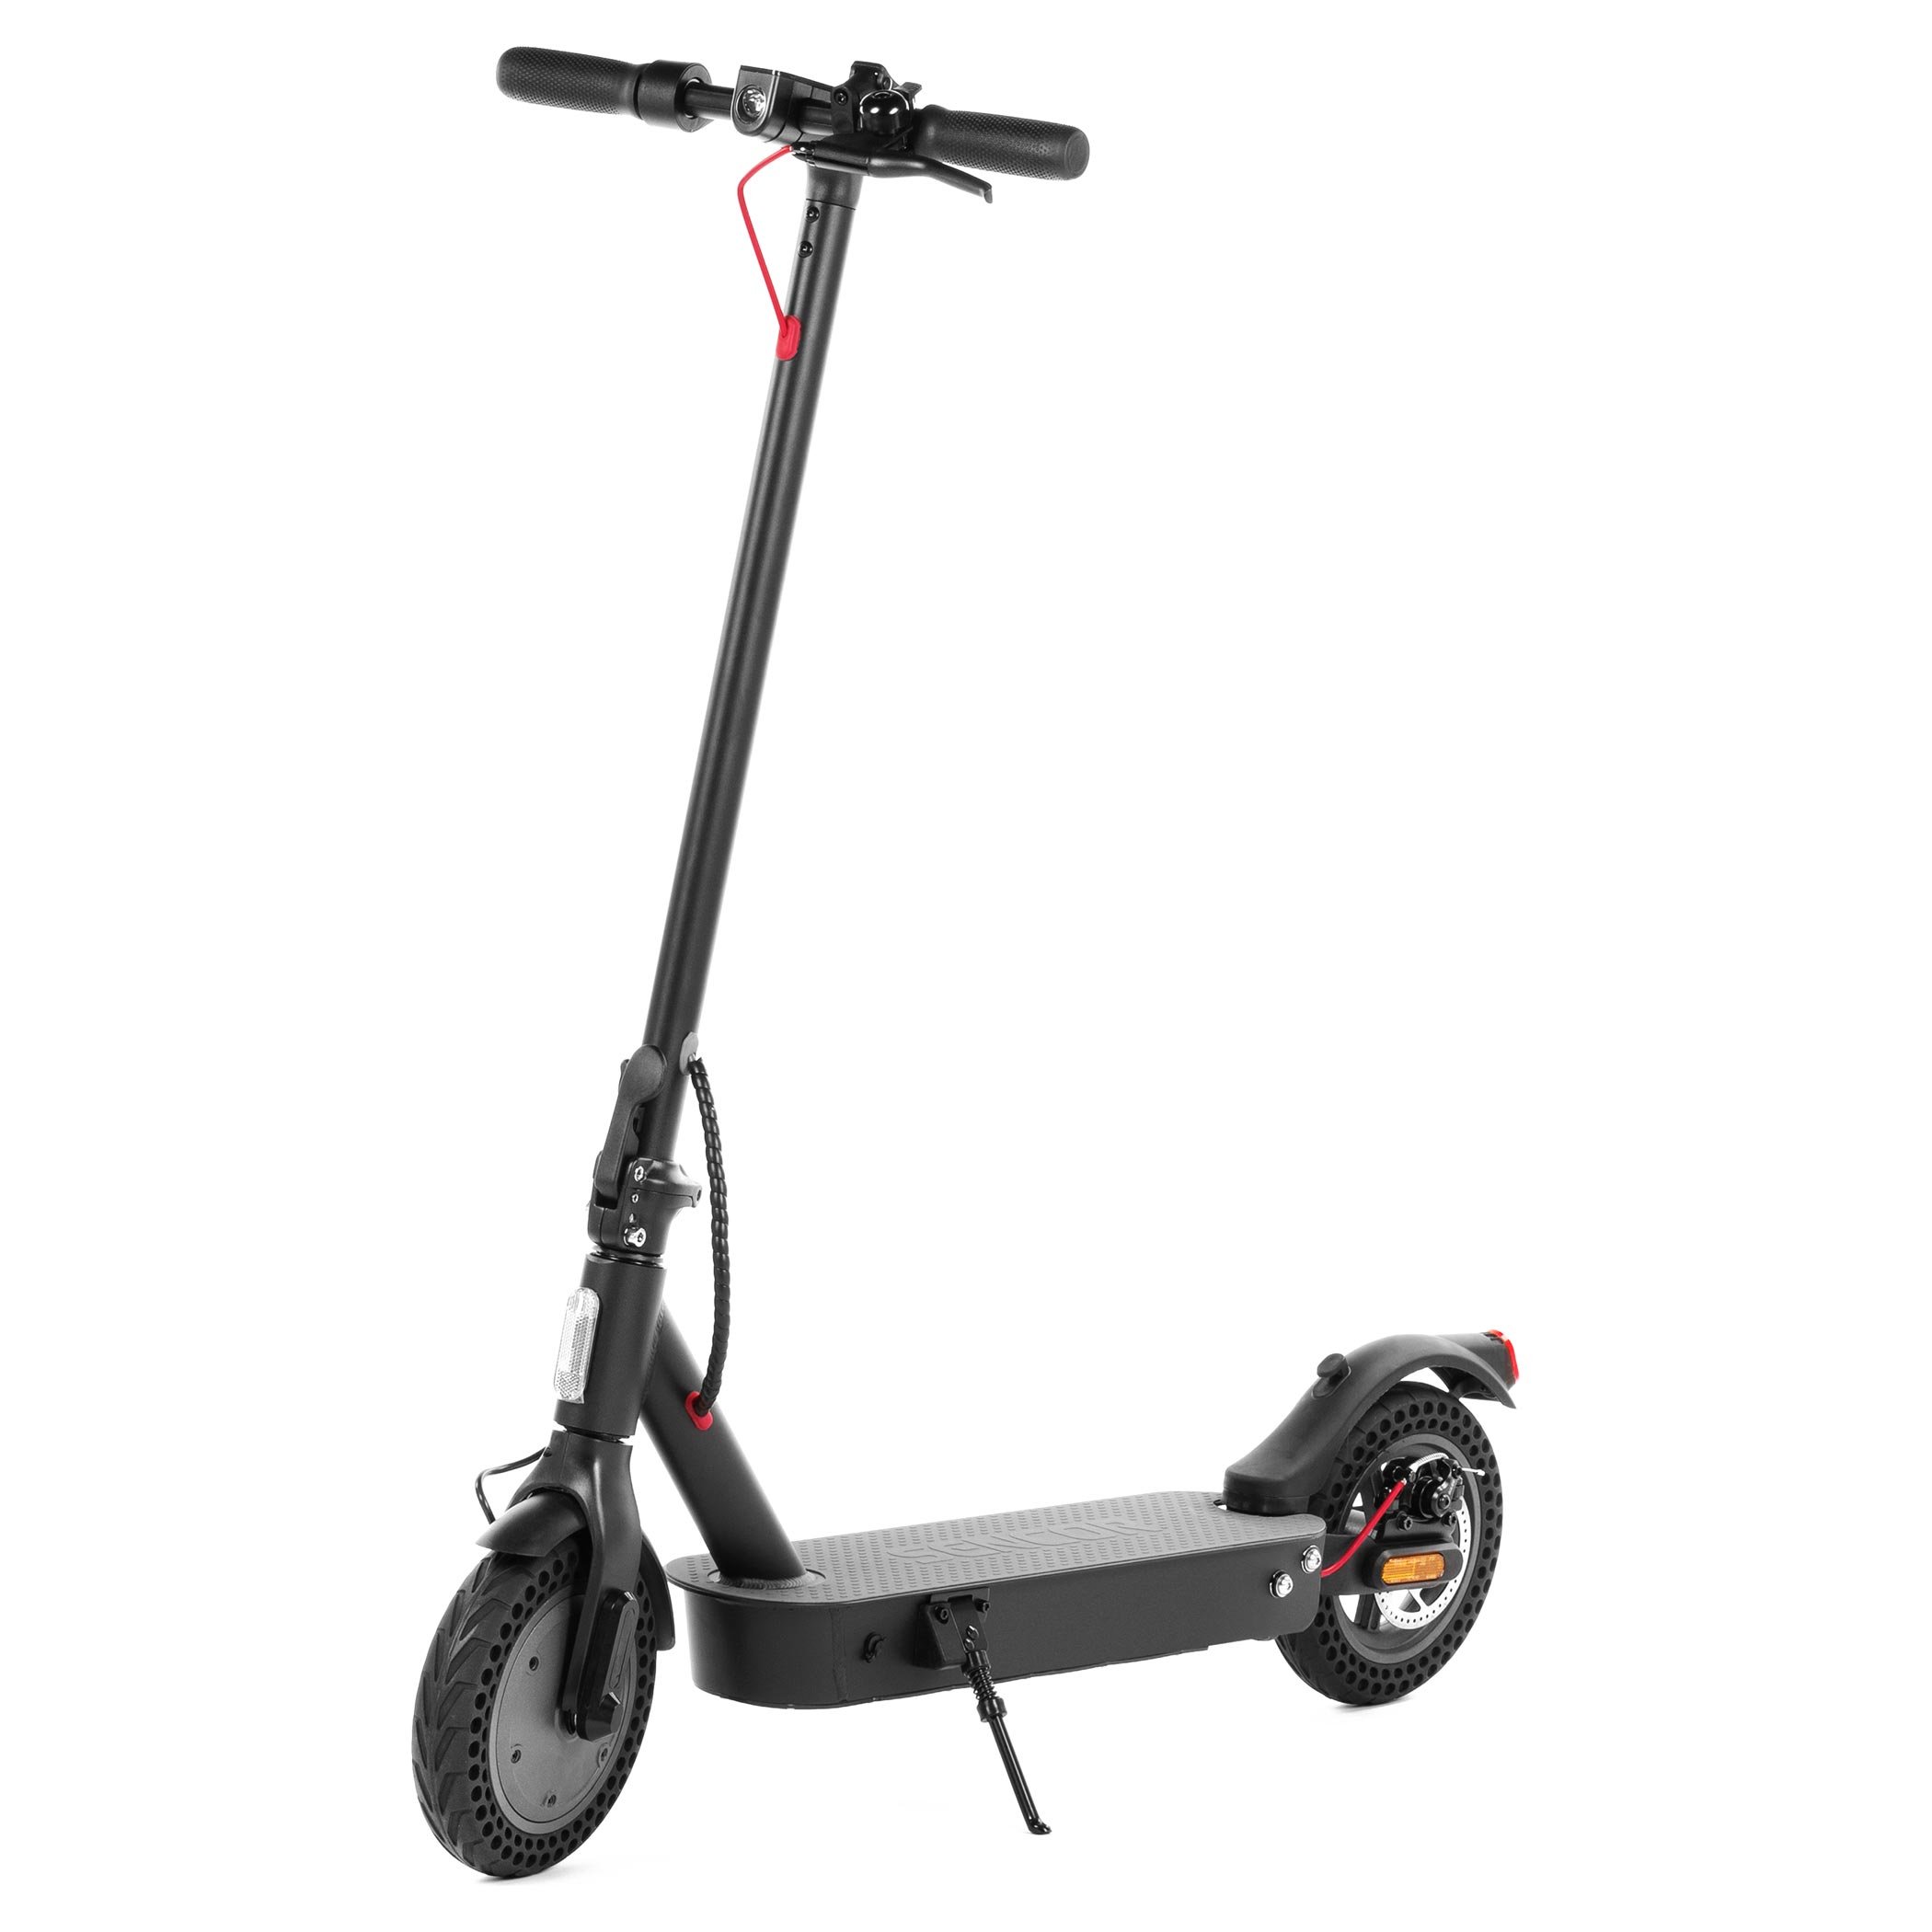 How to save big on your next electric scooter purchase